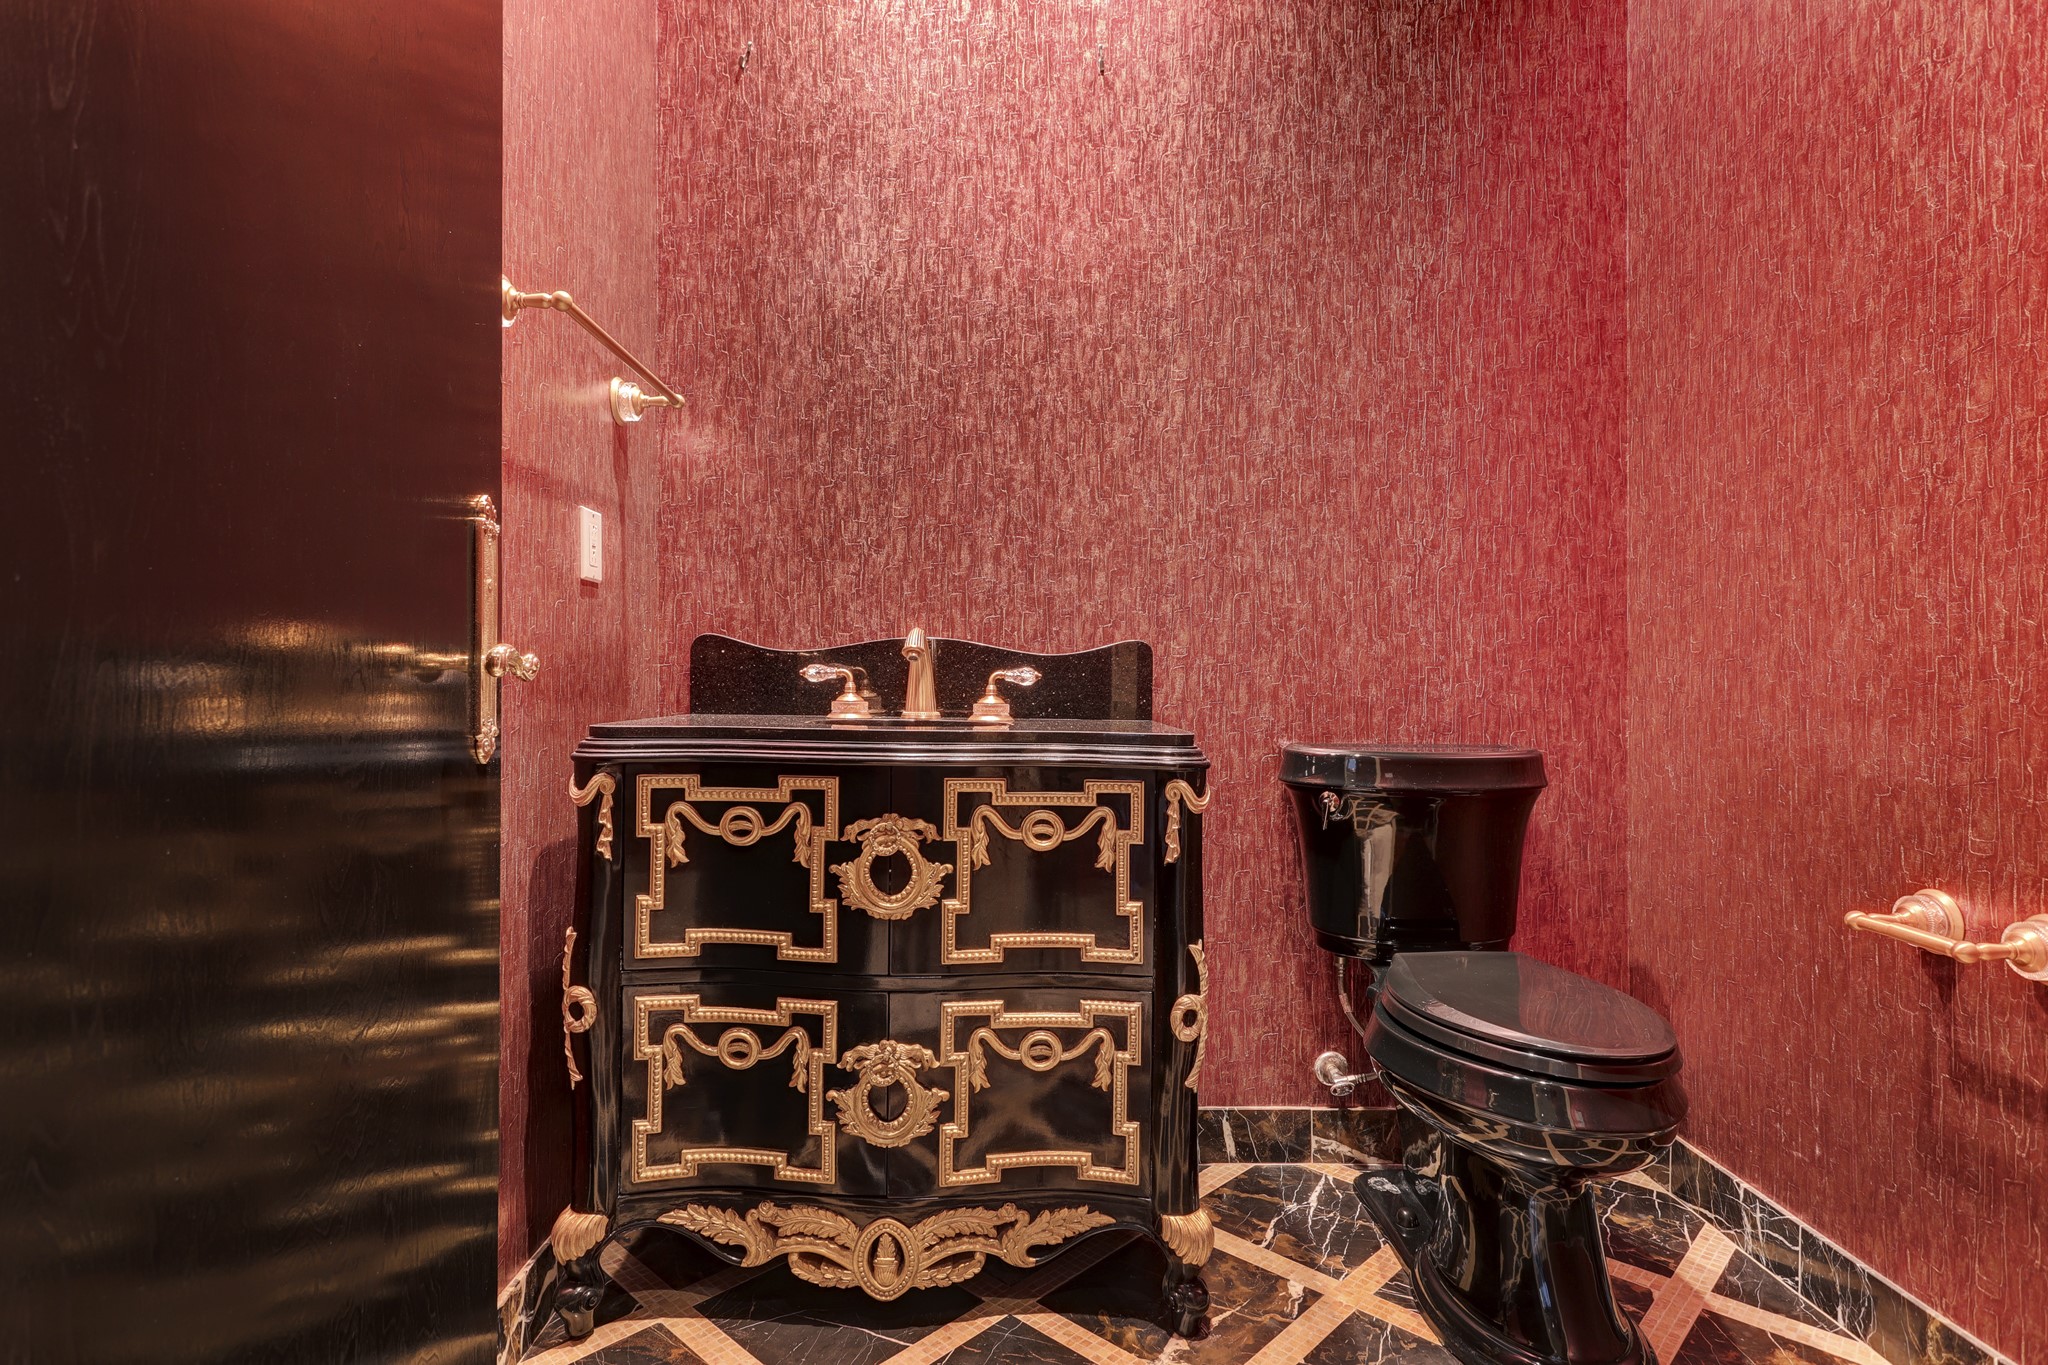 The Powder Room features custom wallpaper, Sherle Wagner fixtures, custom built furniture-style vanity and marble floors with decorative inlay.